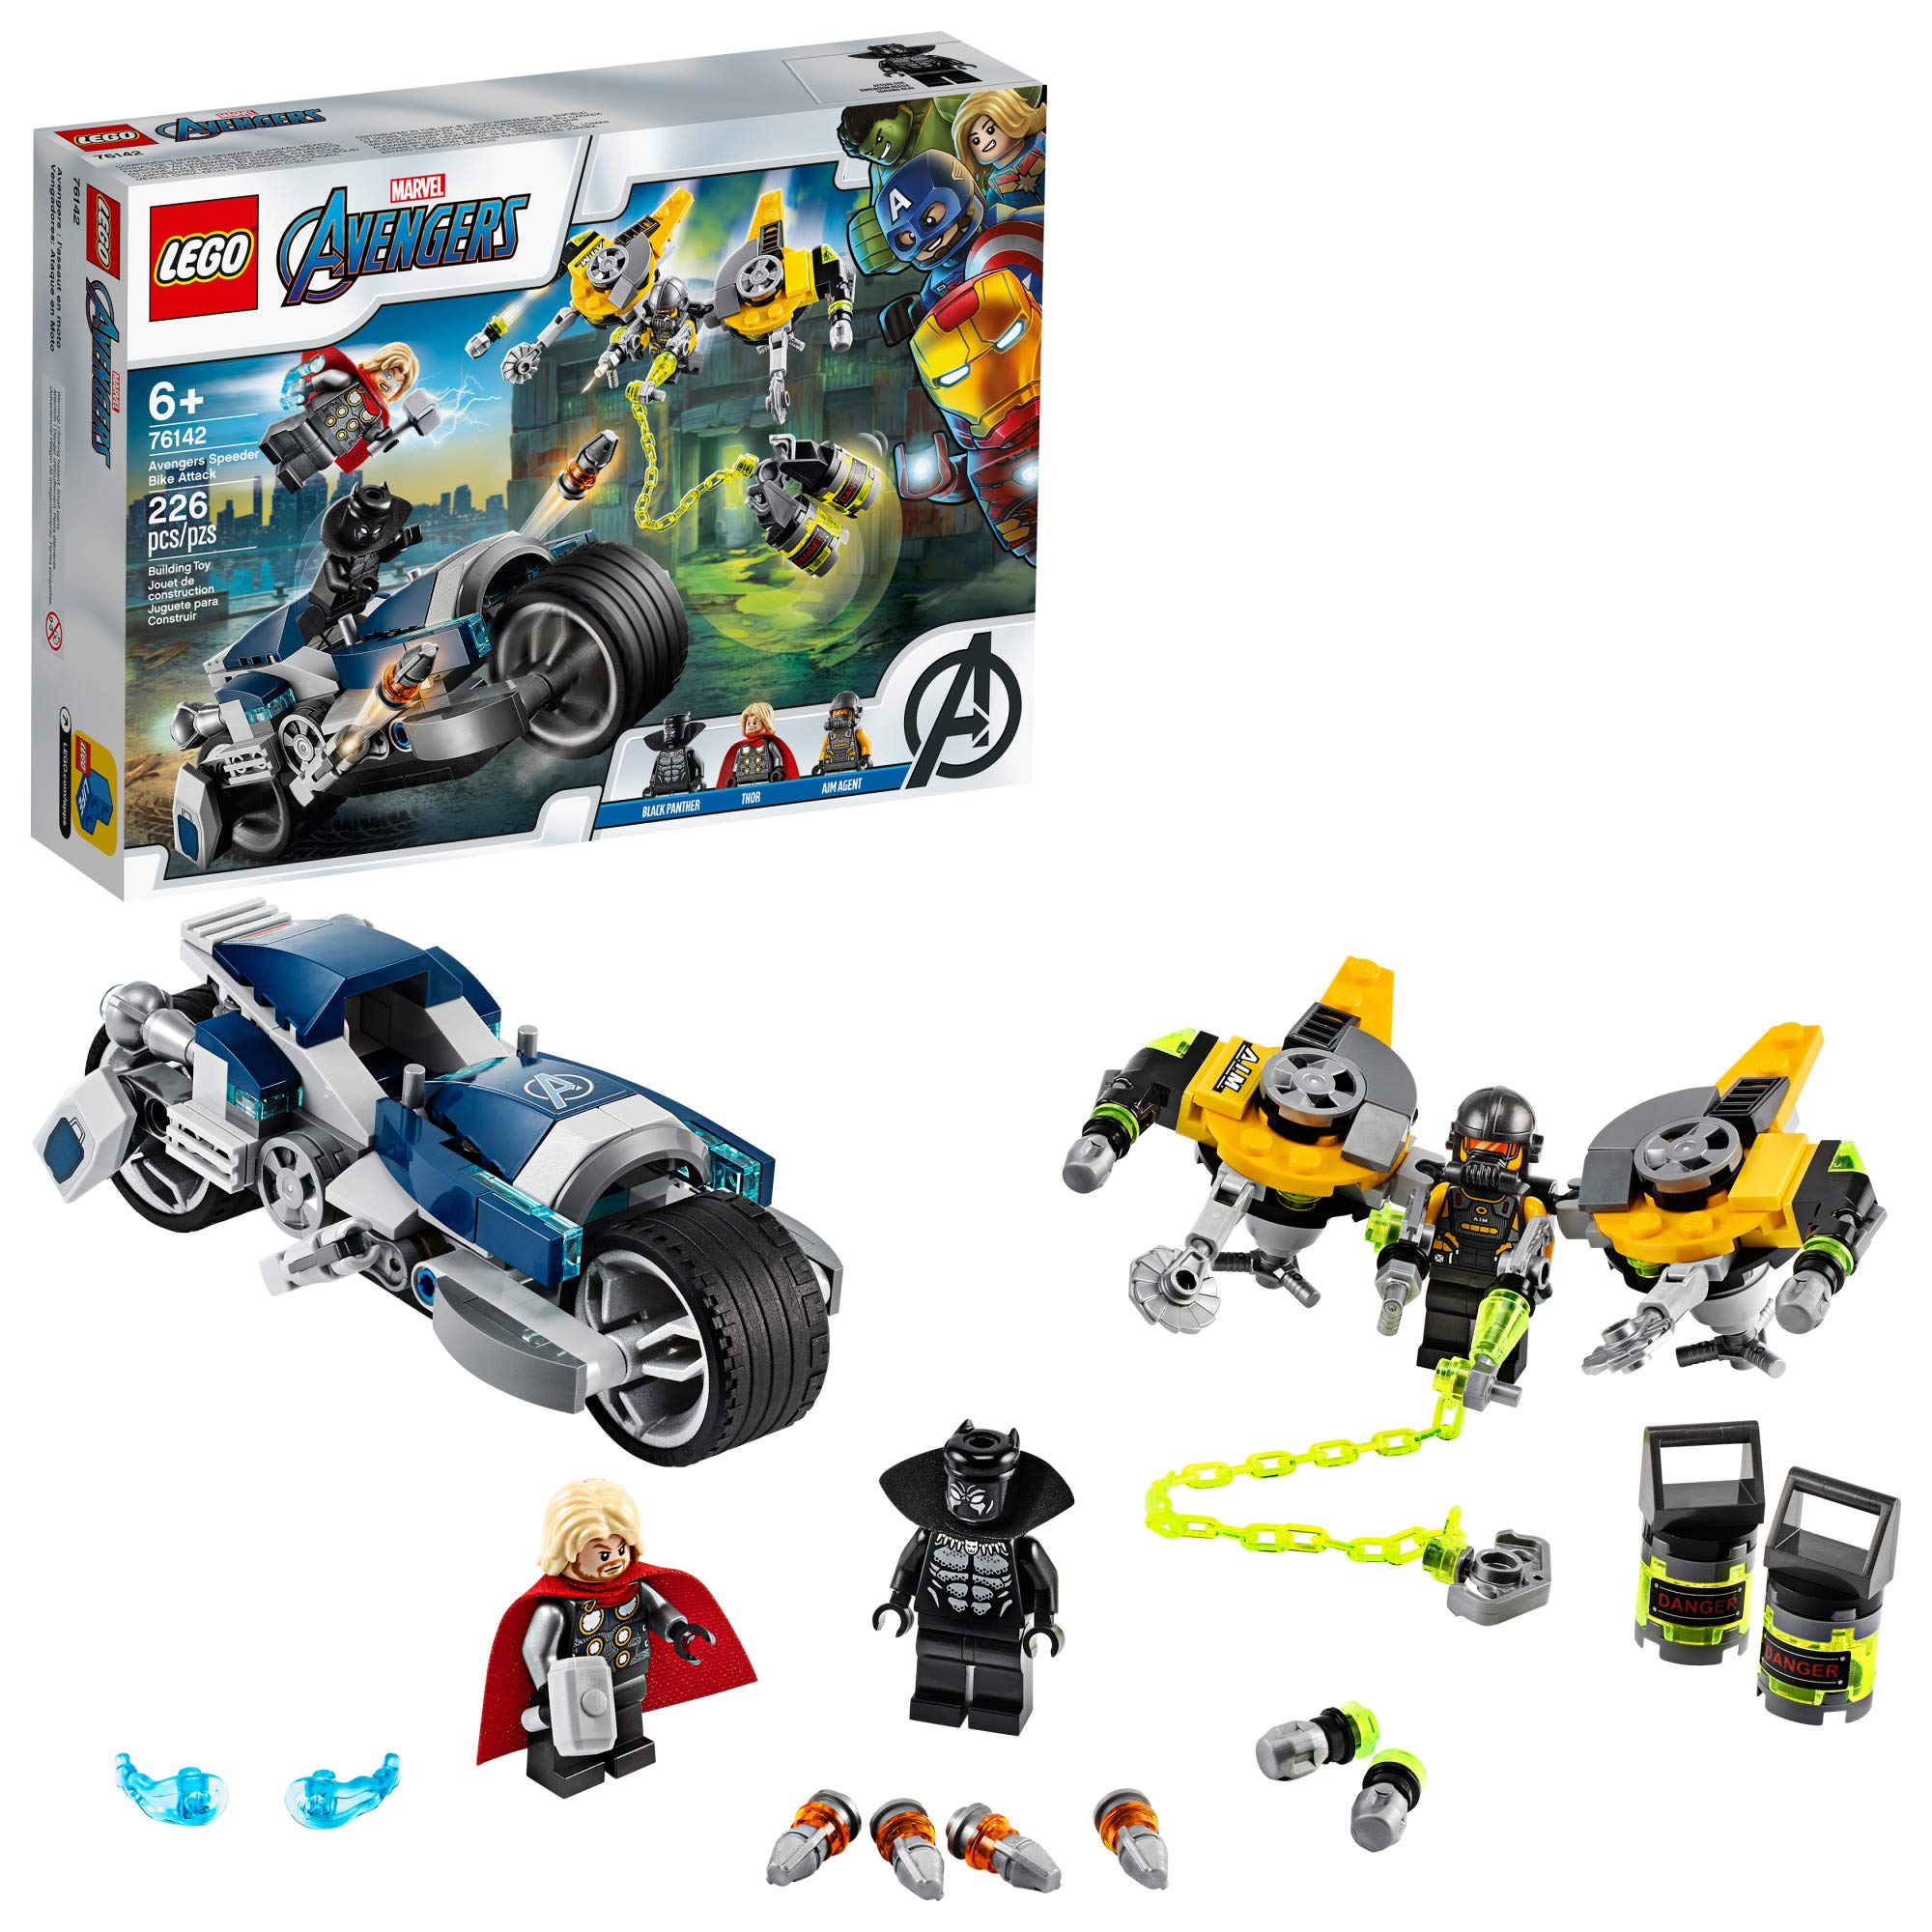 LEGO Marvel Avengers Speeder Bike Attack 76142 Black Panther and Thor Buildable Superhero Toy, Great Gift for Kids, New 2020 (226 Pieces)